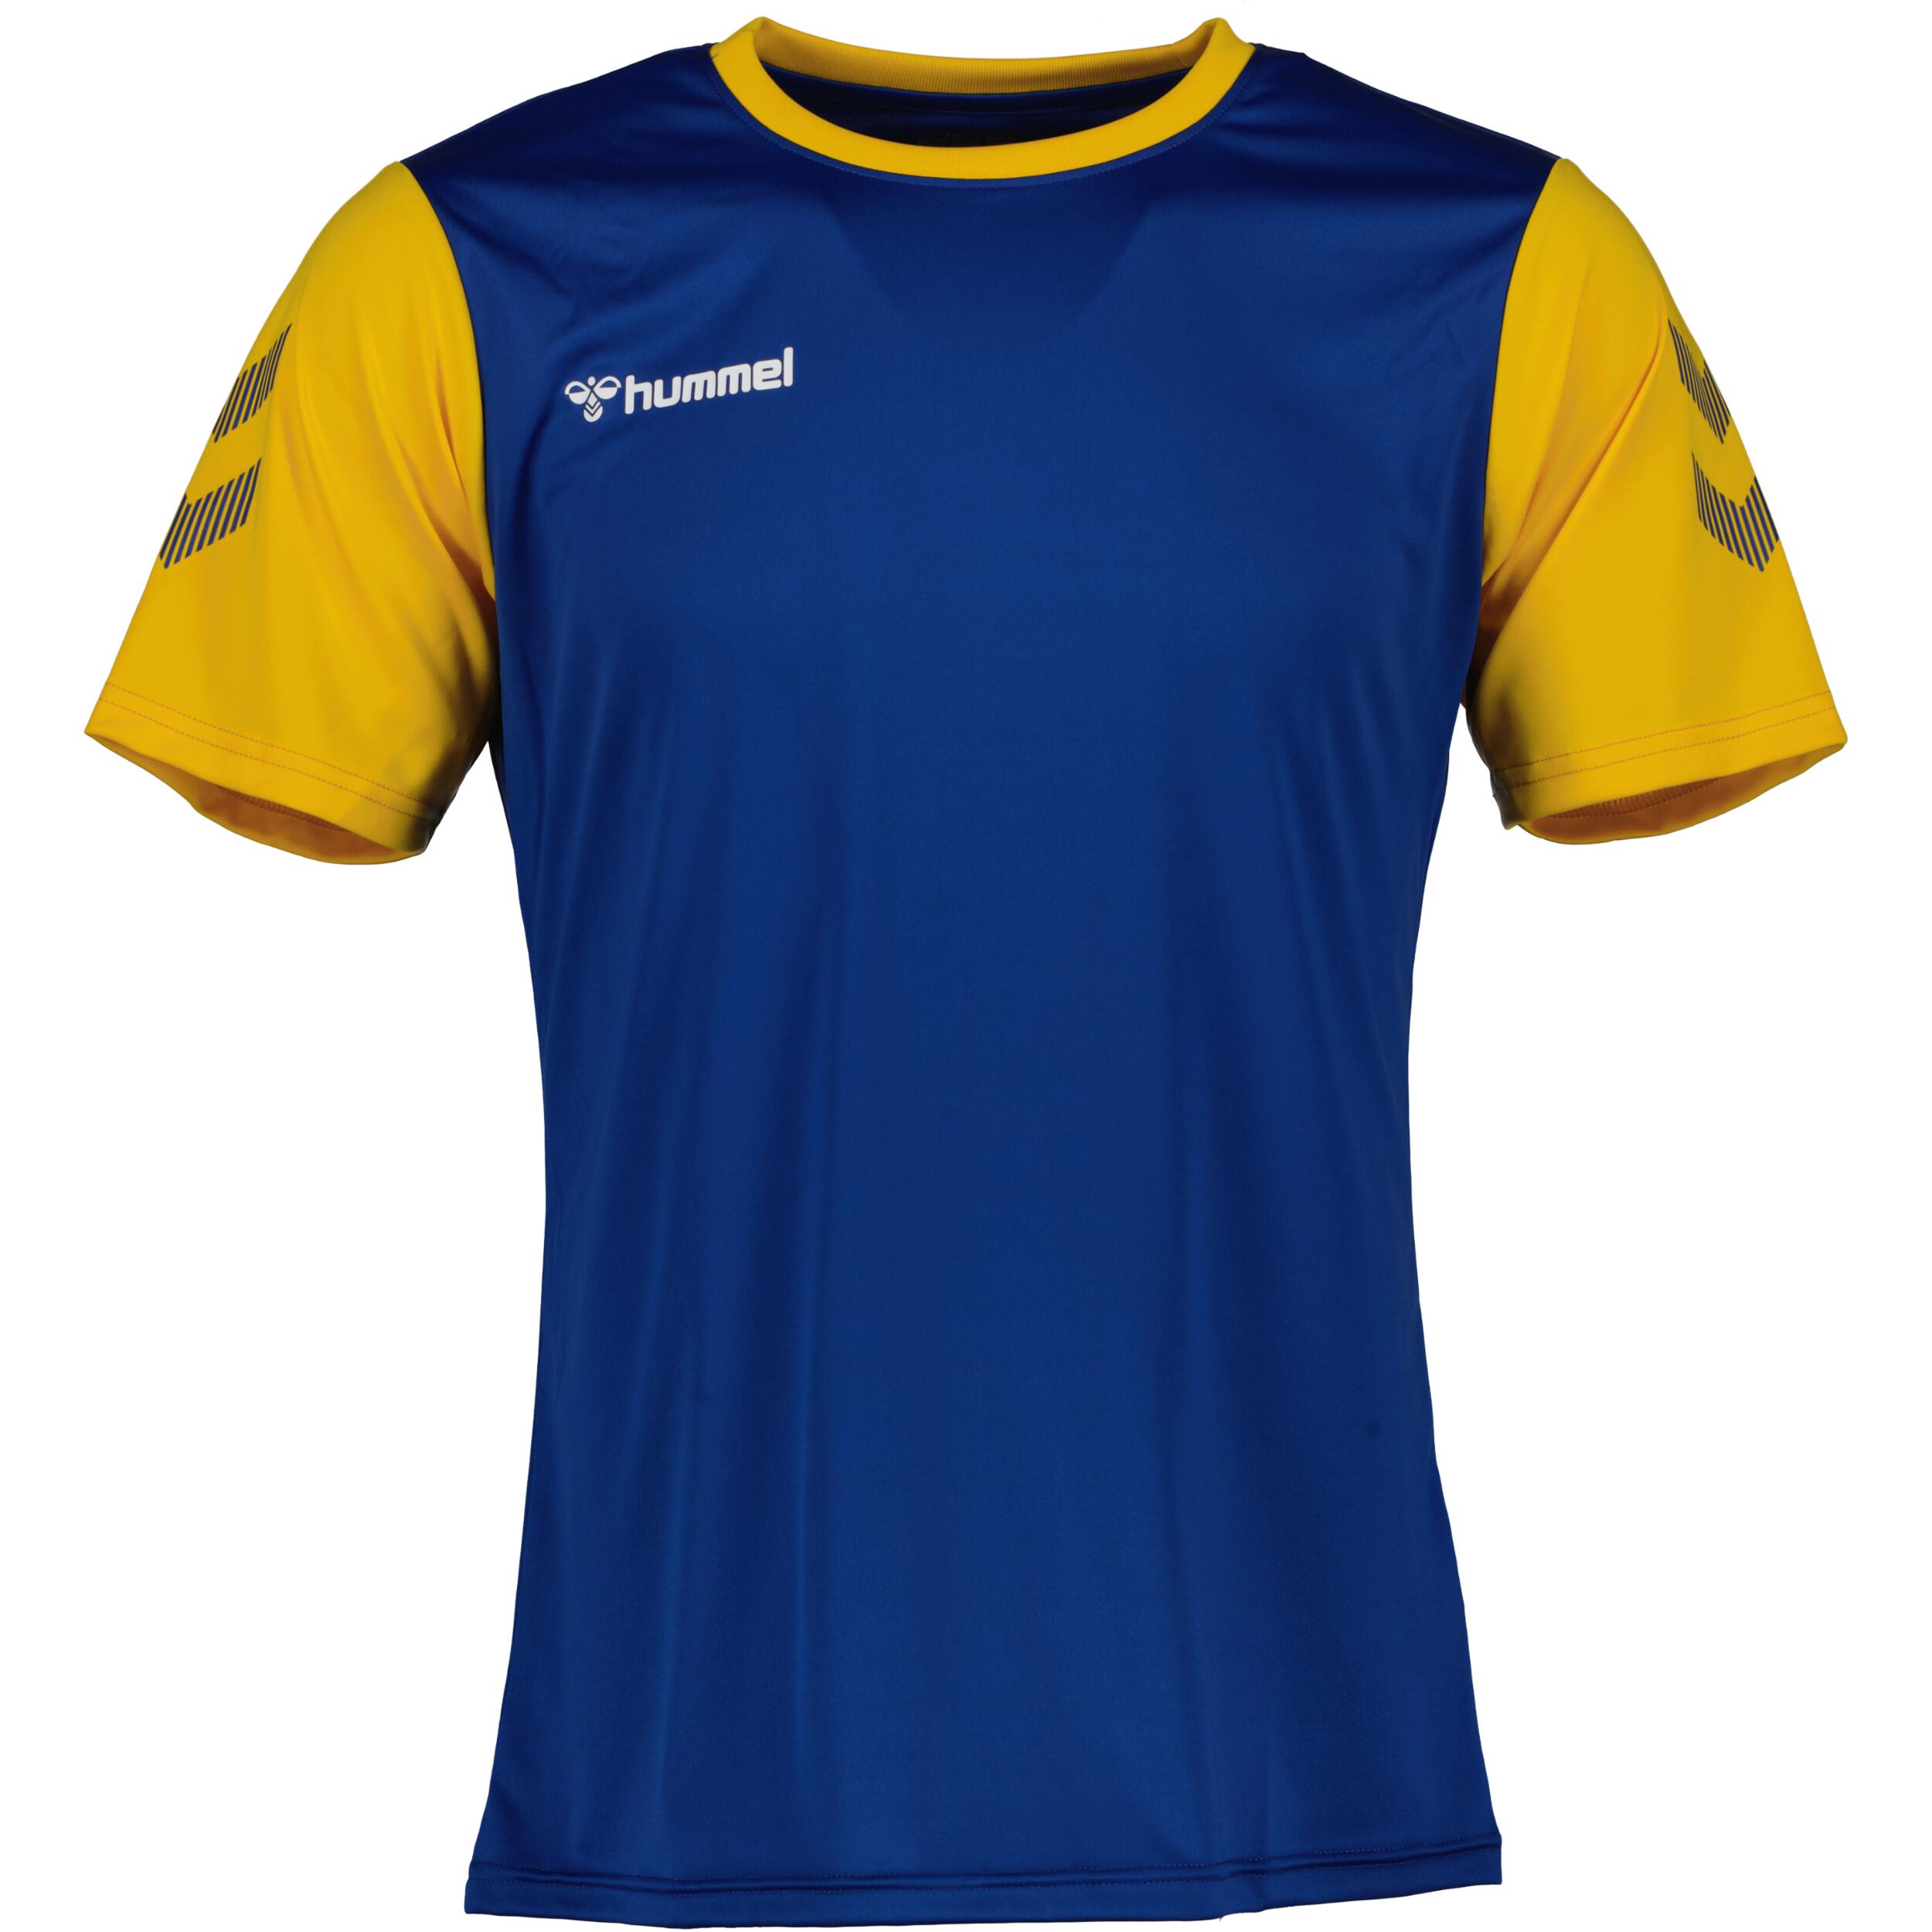 Match jersey for men, great for football, in blue/yellow 1/3